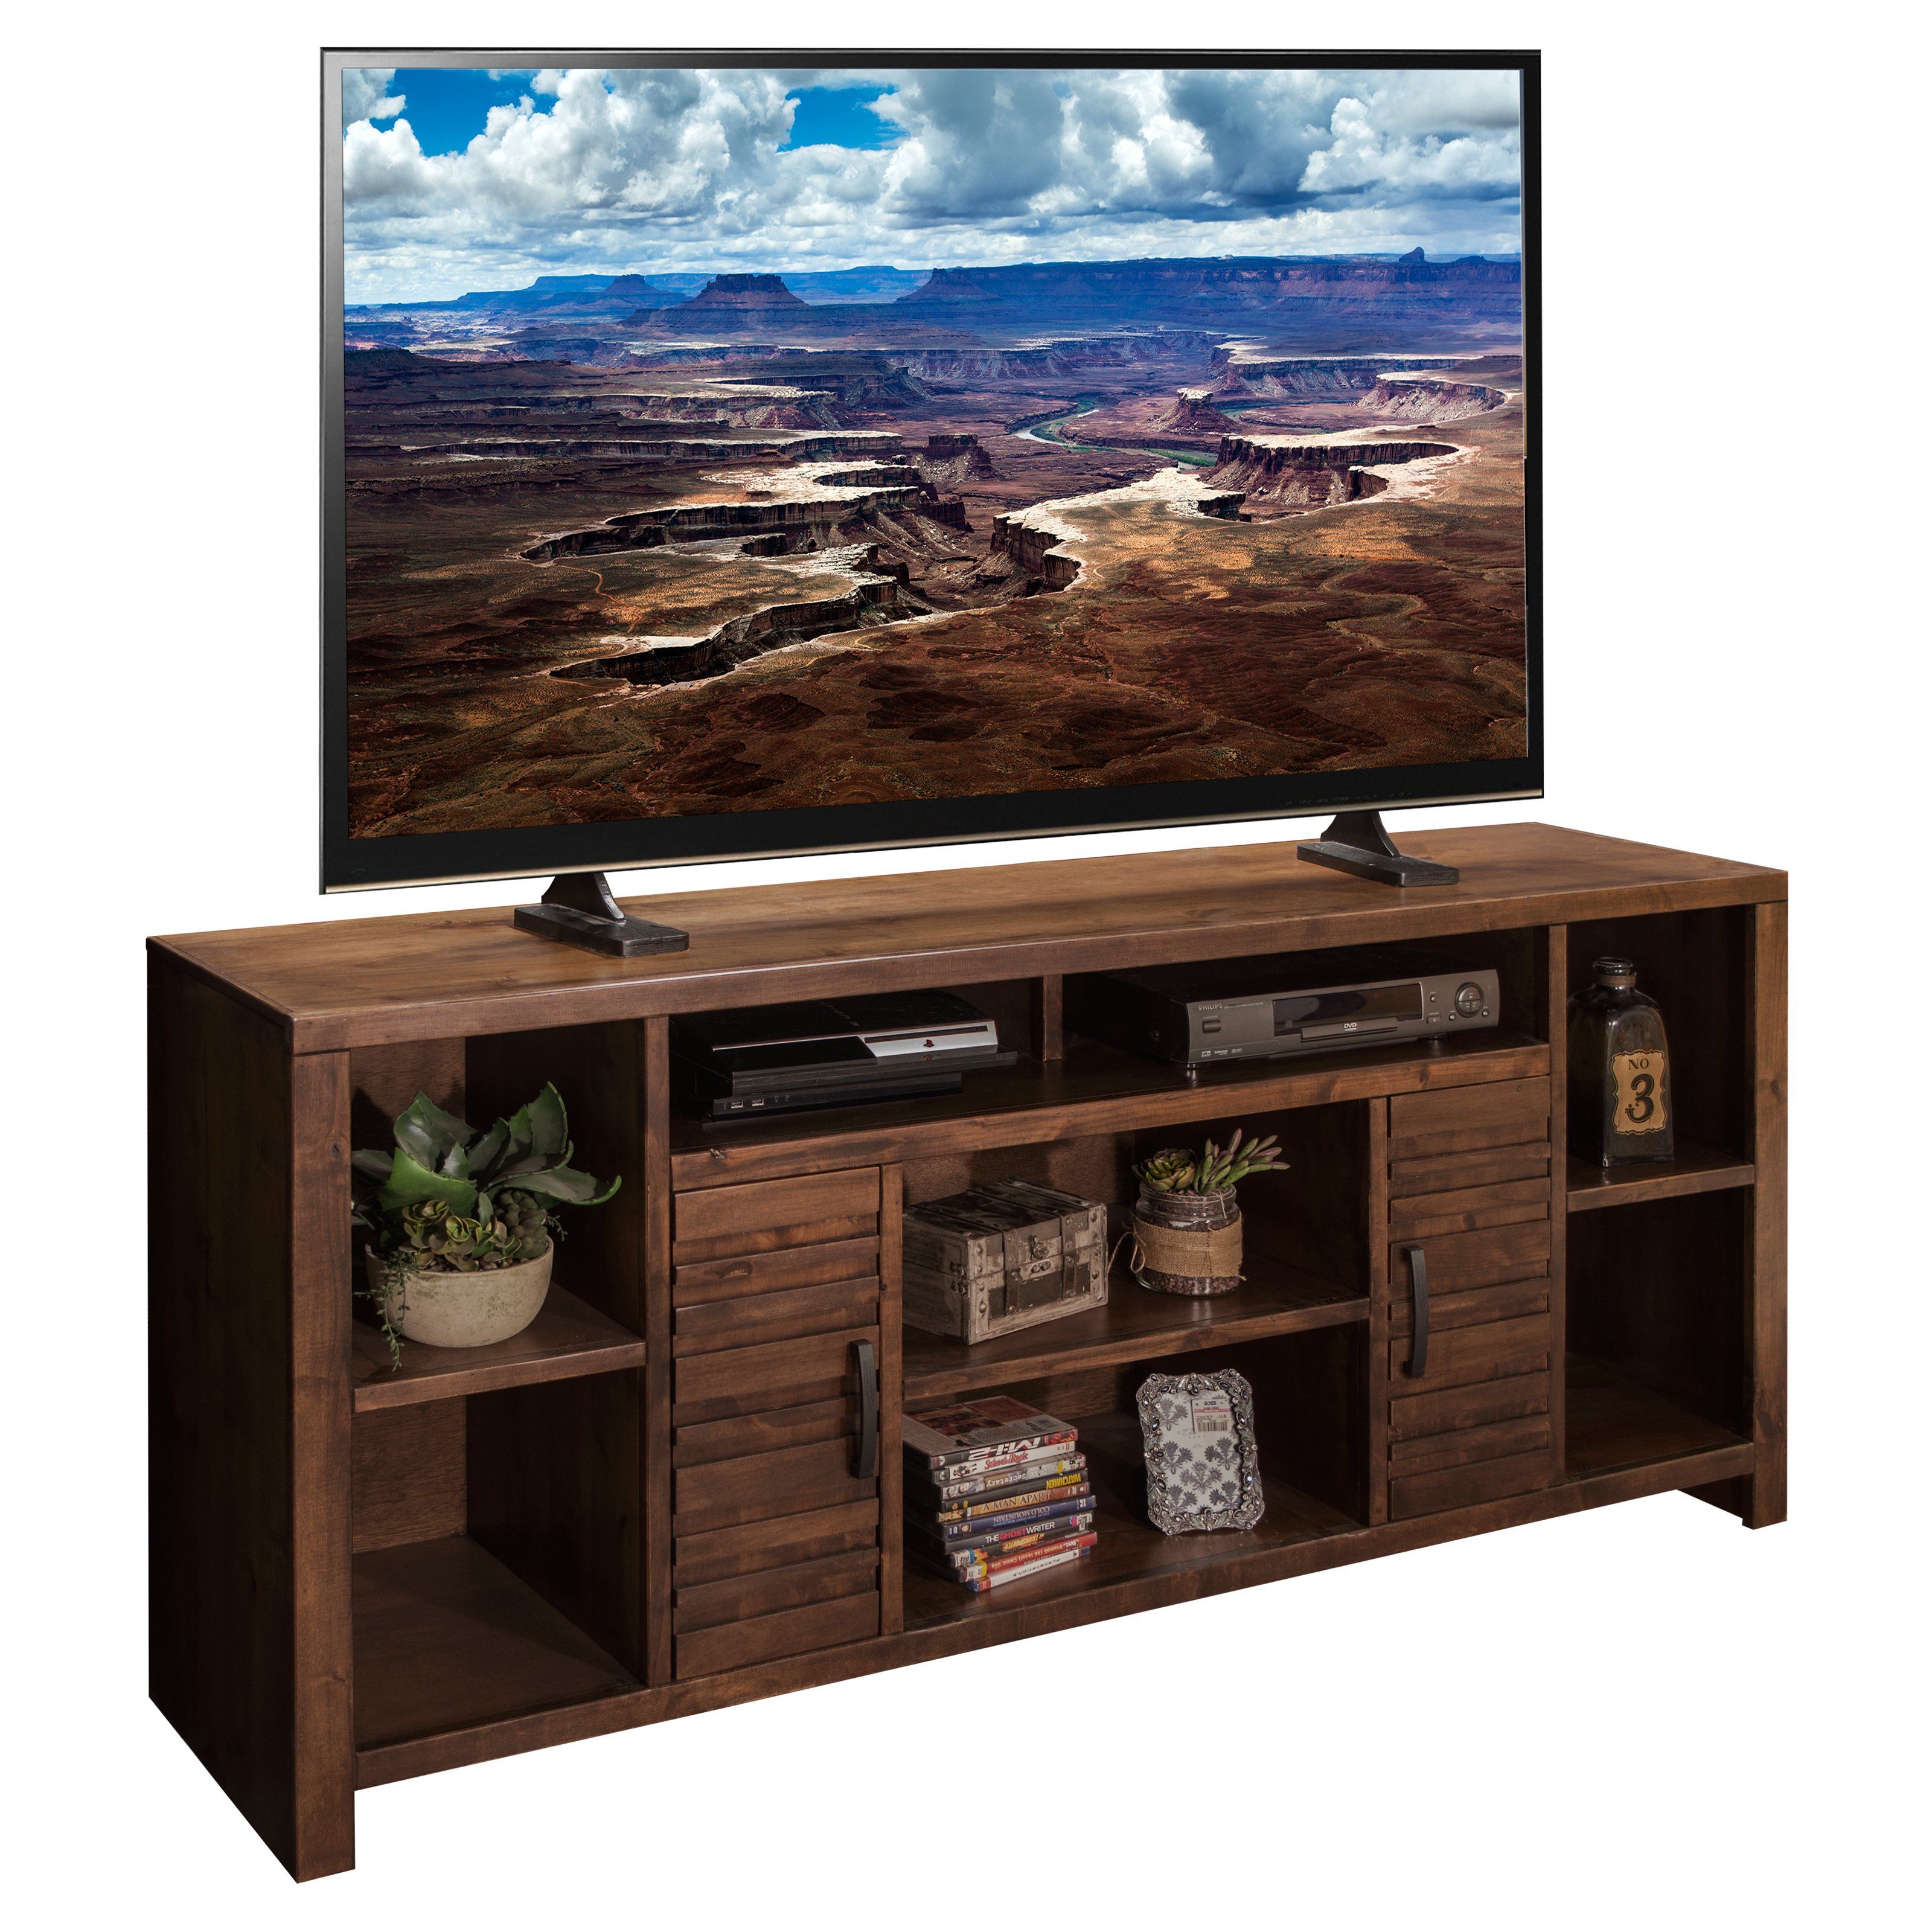 Legends Furniture Sausalito Tv Console | Hayneedle For Murphy 72 Inch Tv Stands (View 21 of 30)